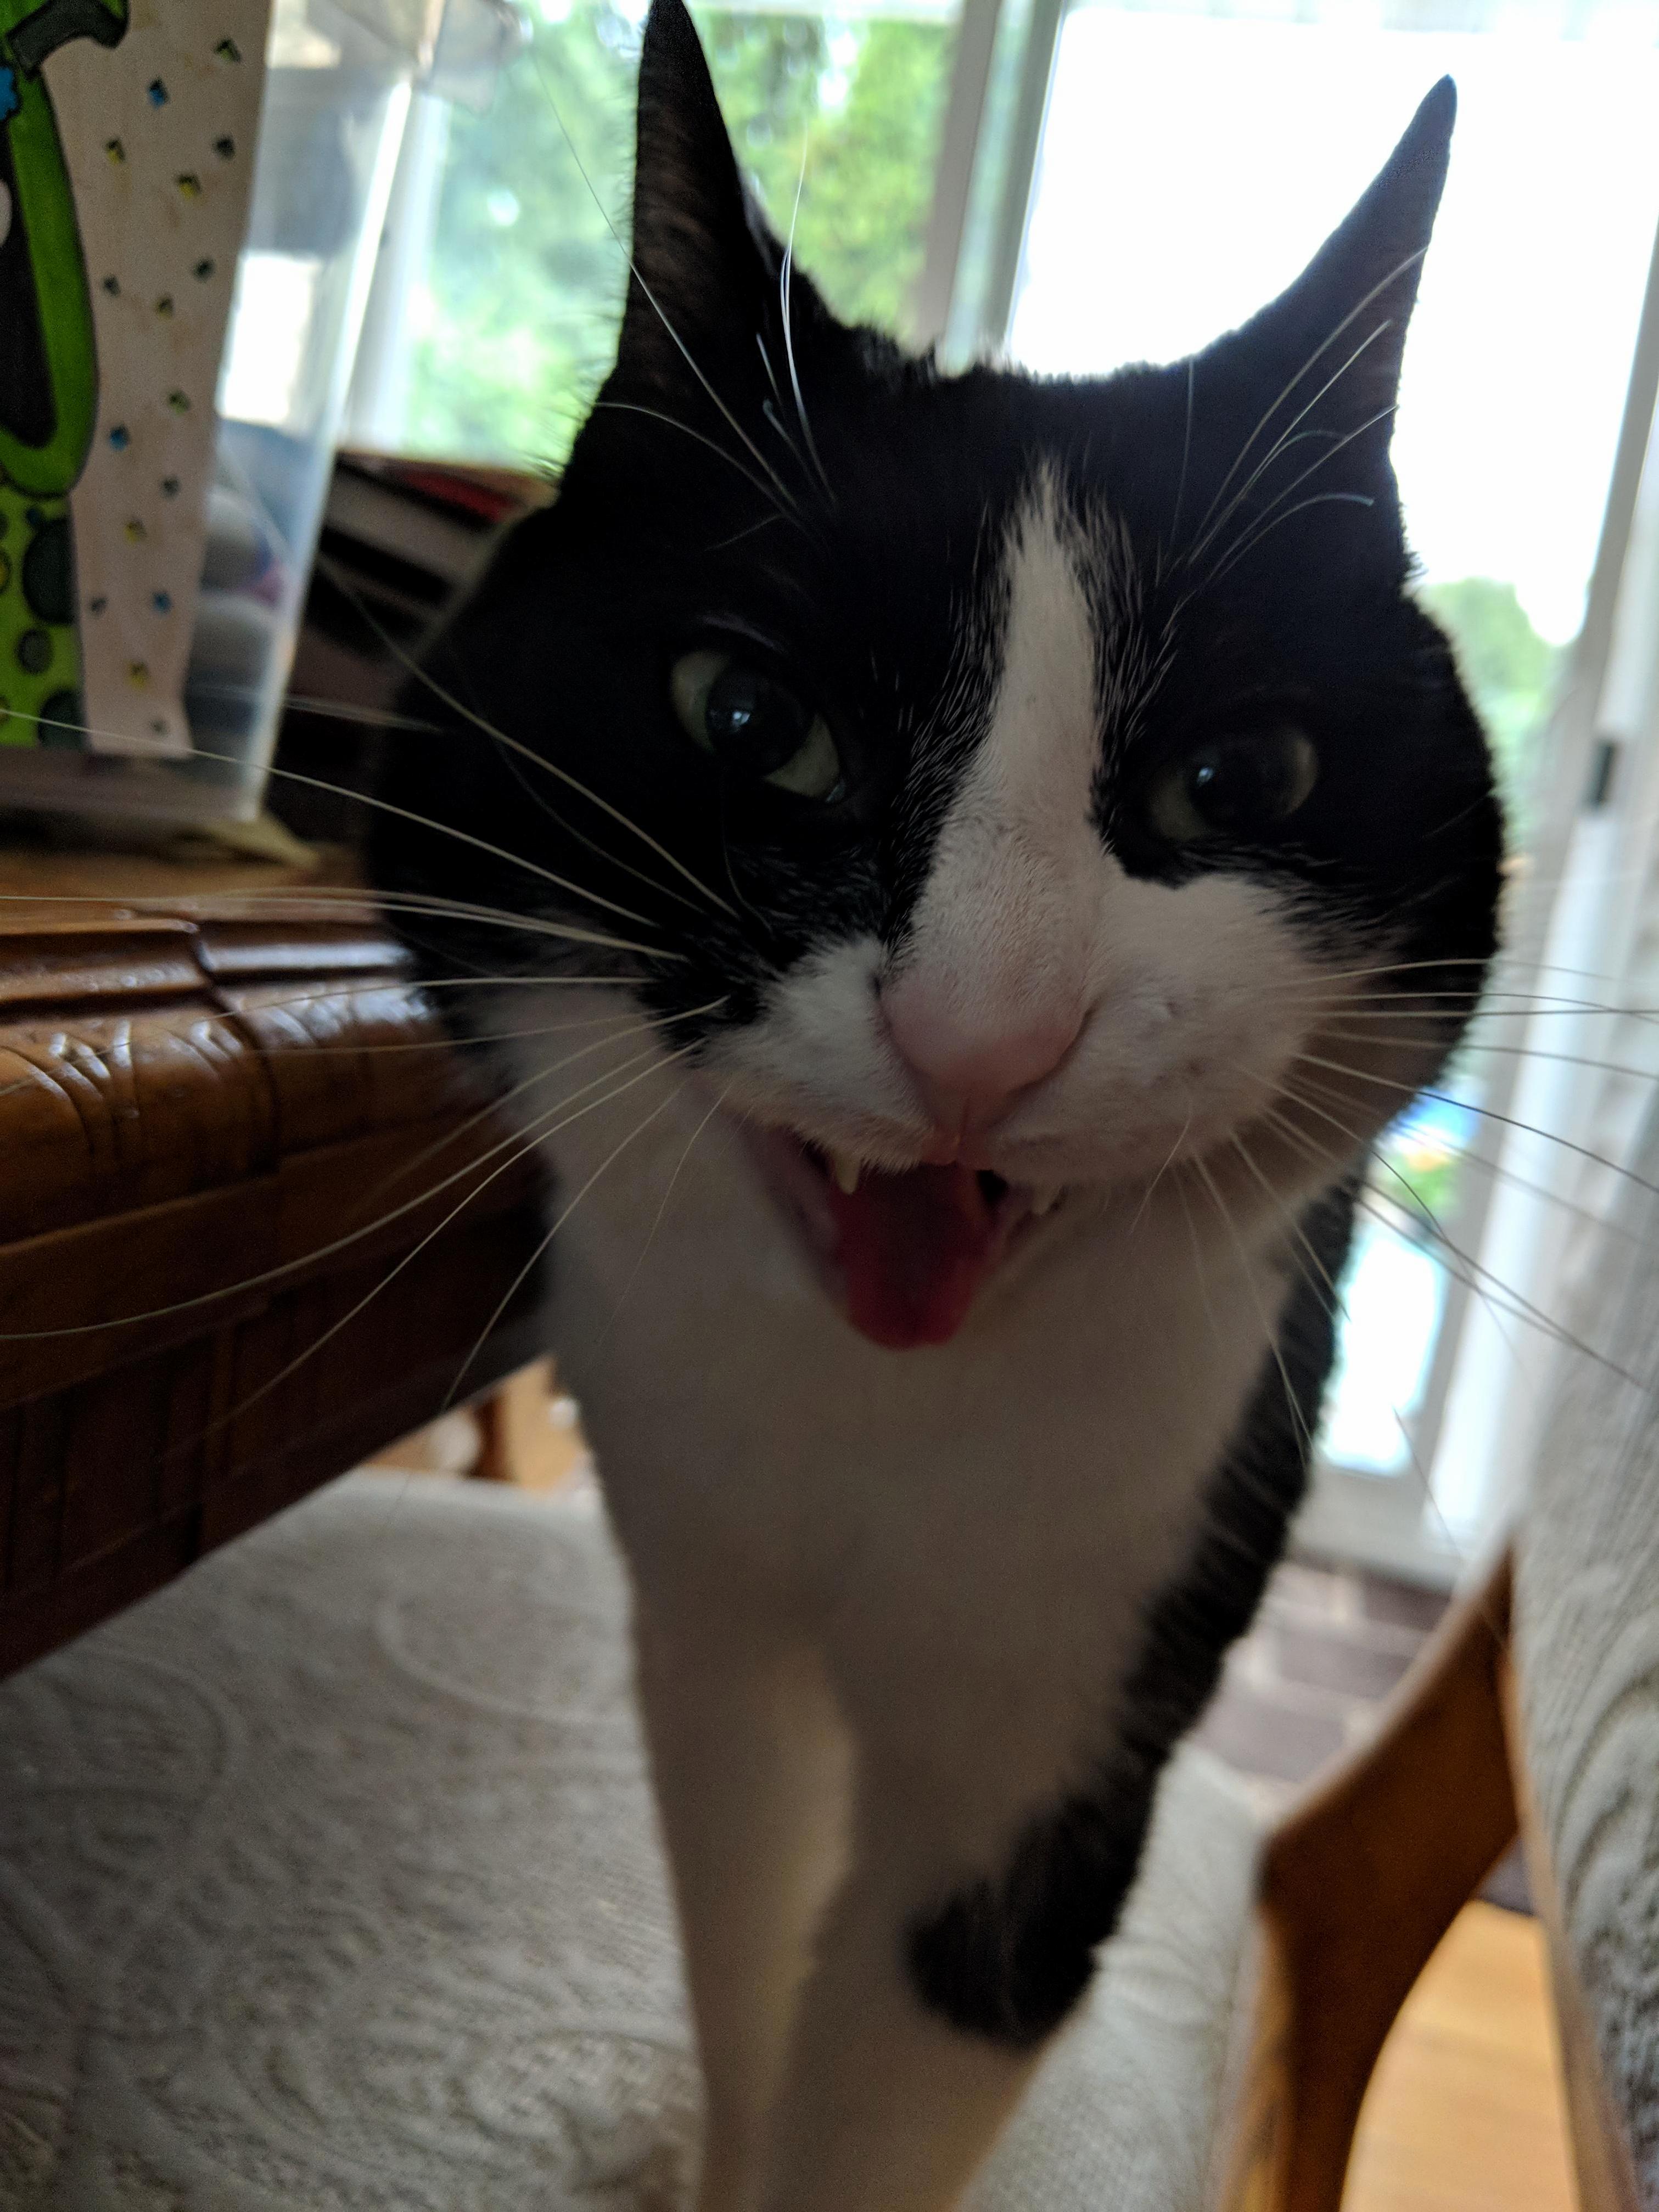 Snapped a picture of my cat, ricky, mid yawn!